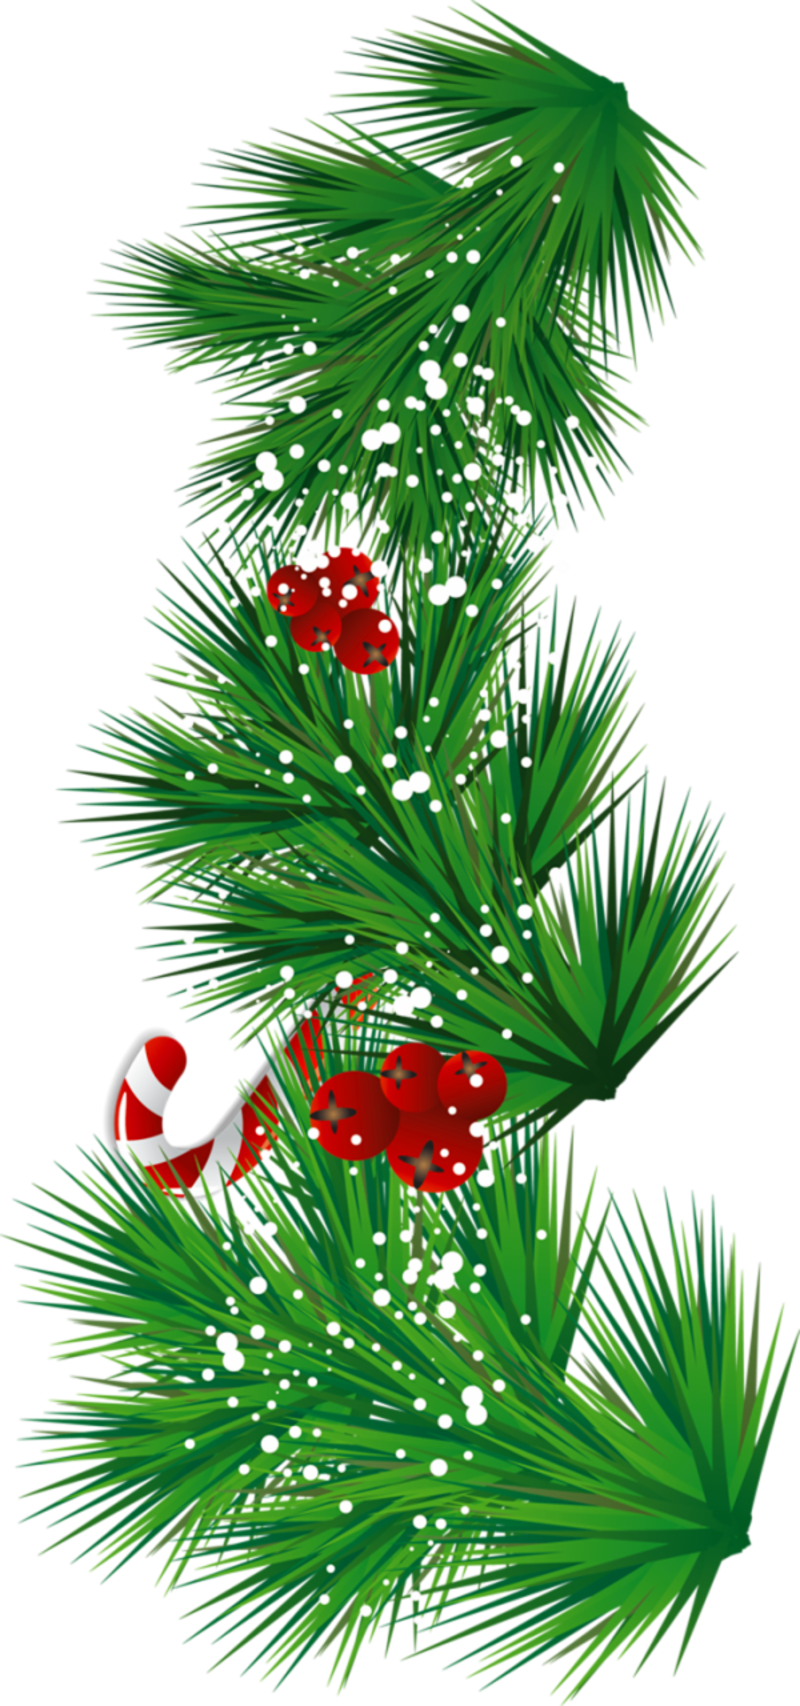 Transparent_Pine_Branch_with_Candy_Cane_and_Mistletoe_PNG_Clipart.png